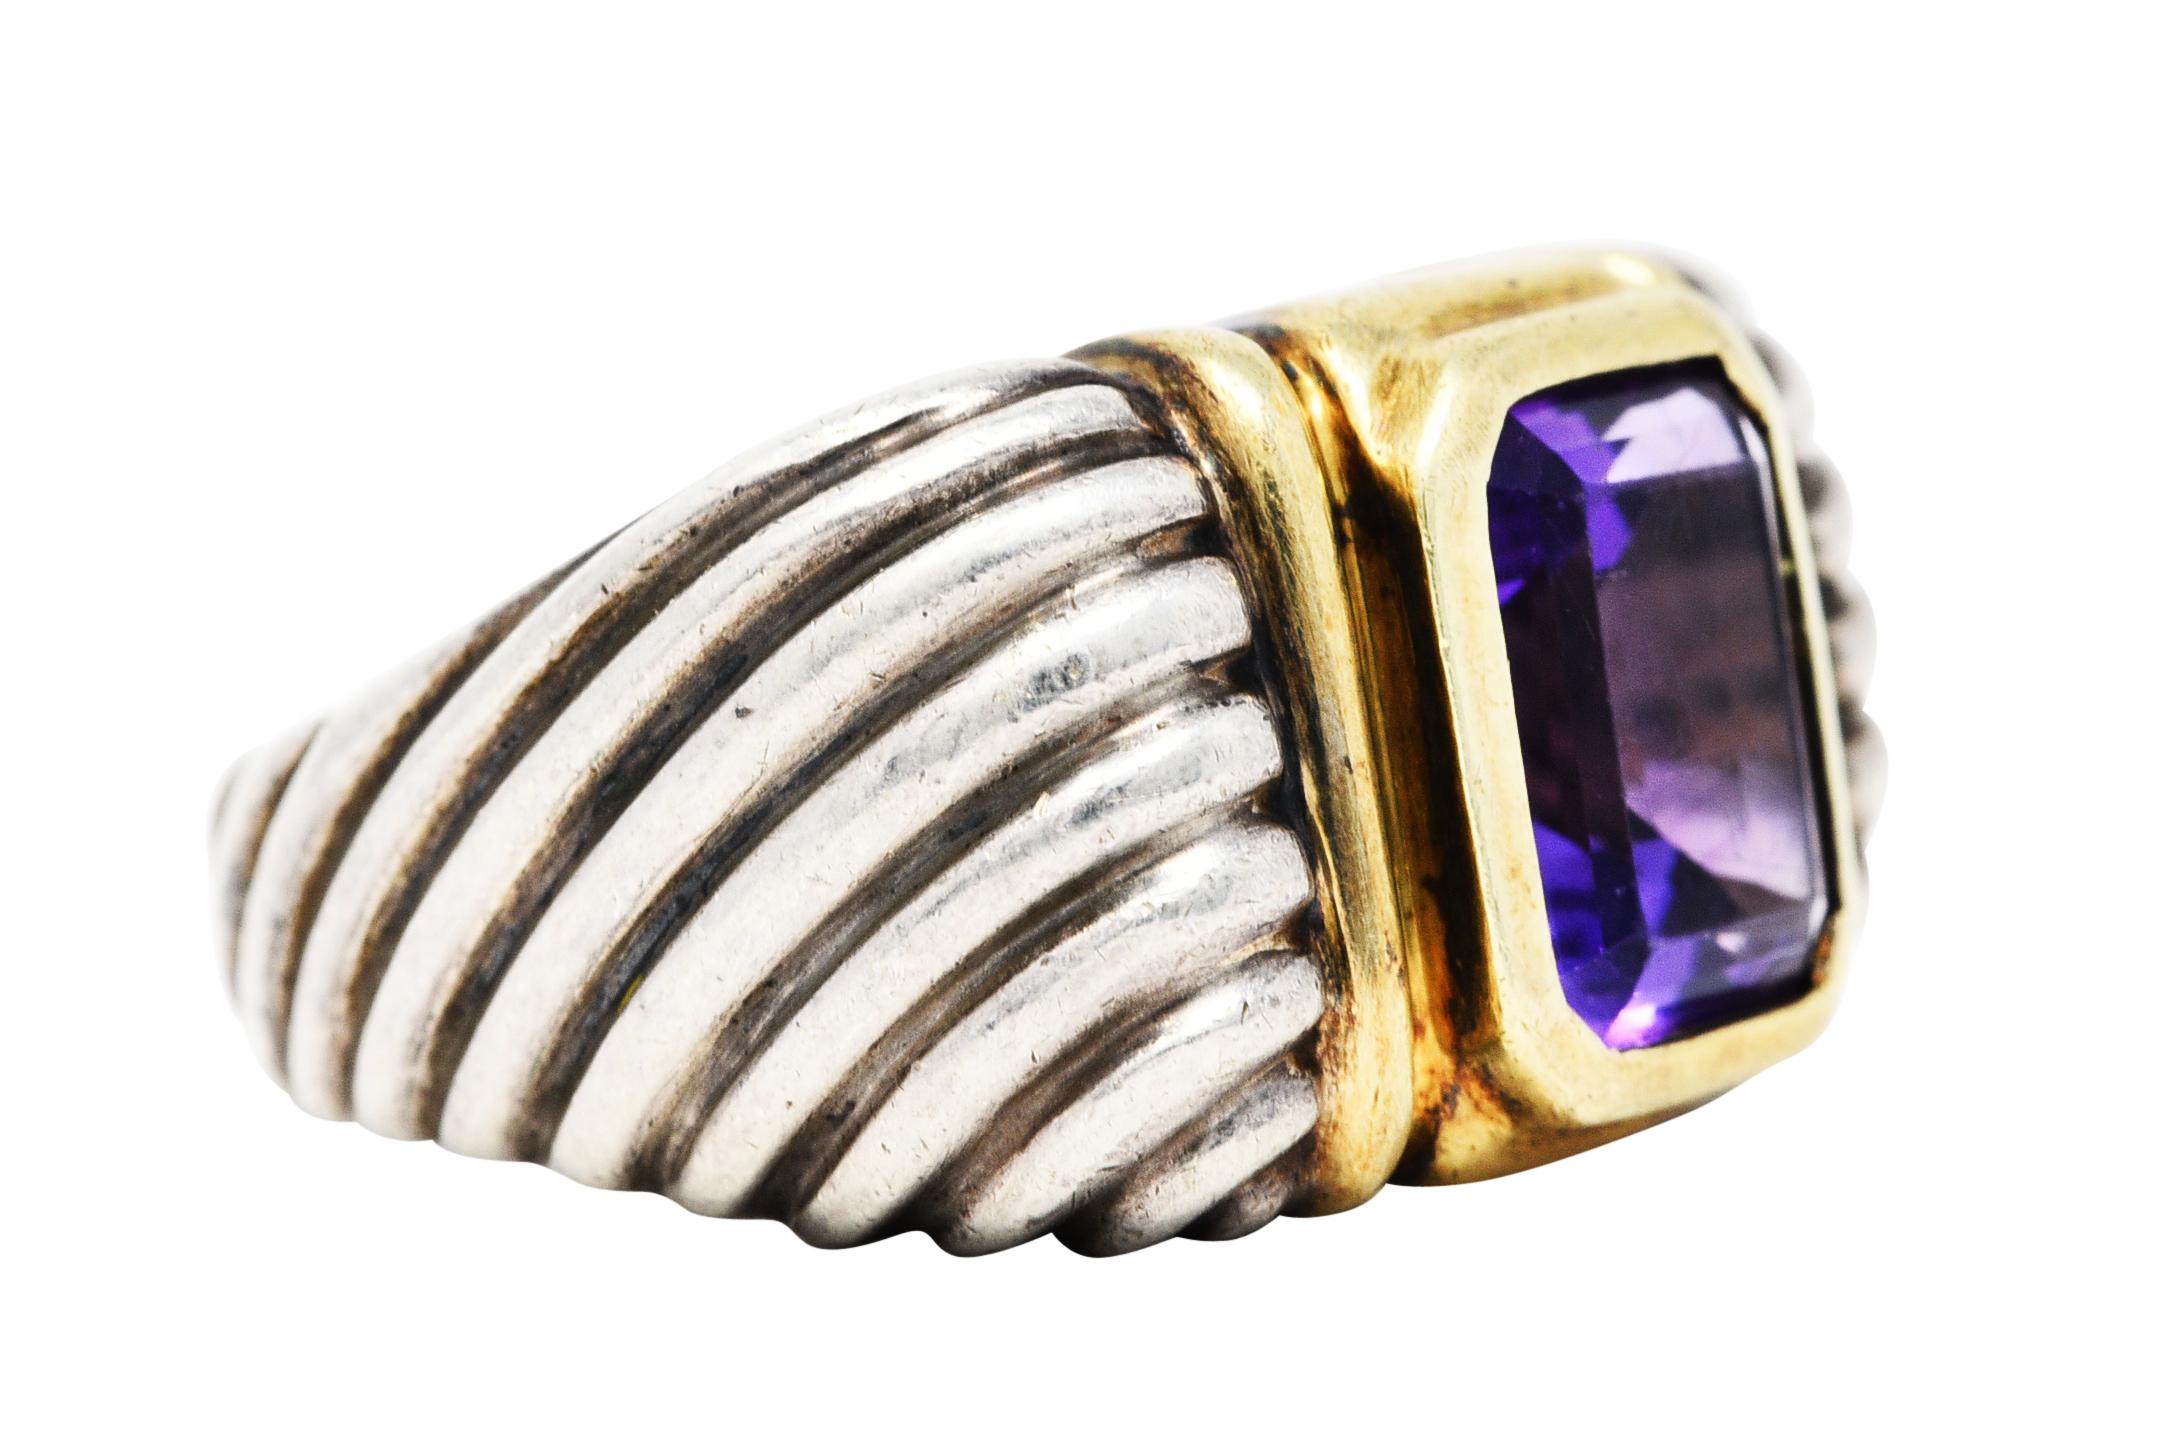 Centering an emerald cut amethyst measuring approximately 10.0 x 8.0 mm

Transparent and a saturated violetish purple in color

Bezel set in polished gold surround

Completed by cushion shoulders with classic cable design extending down the